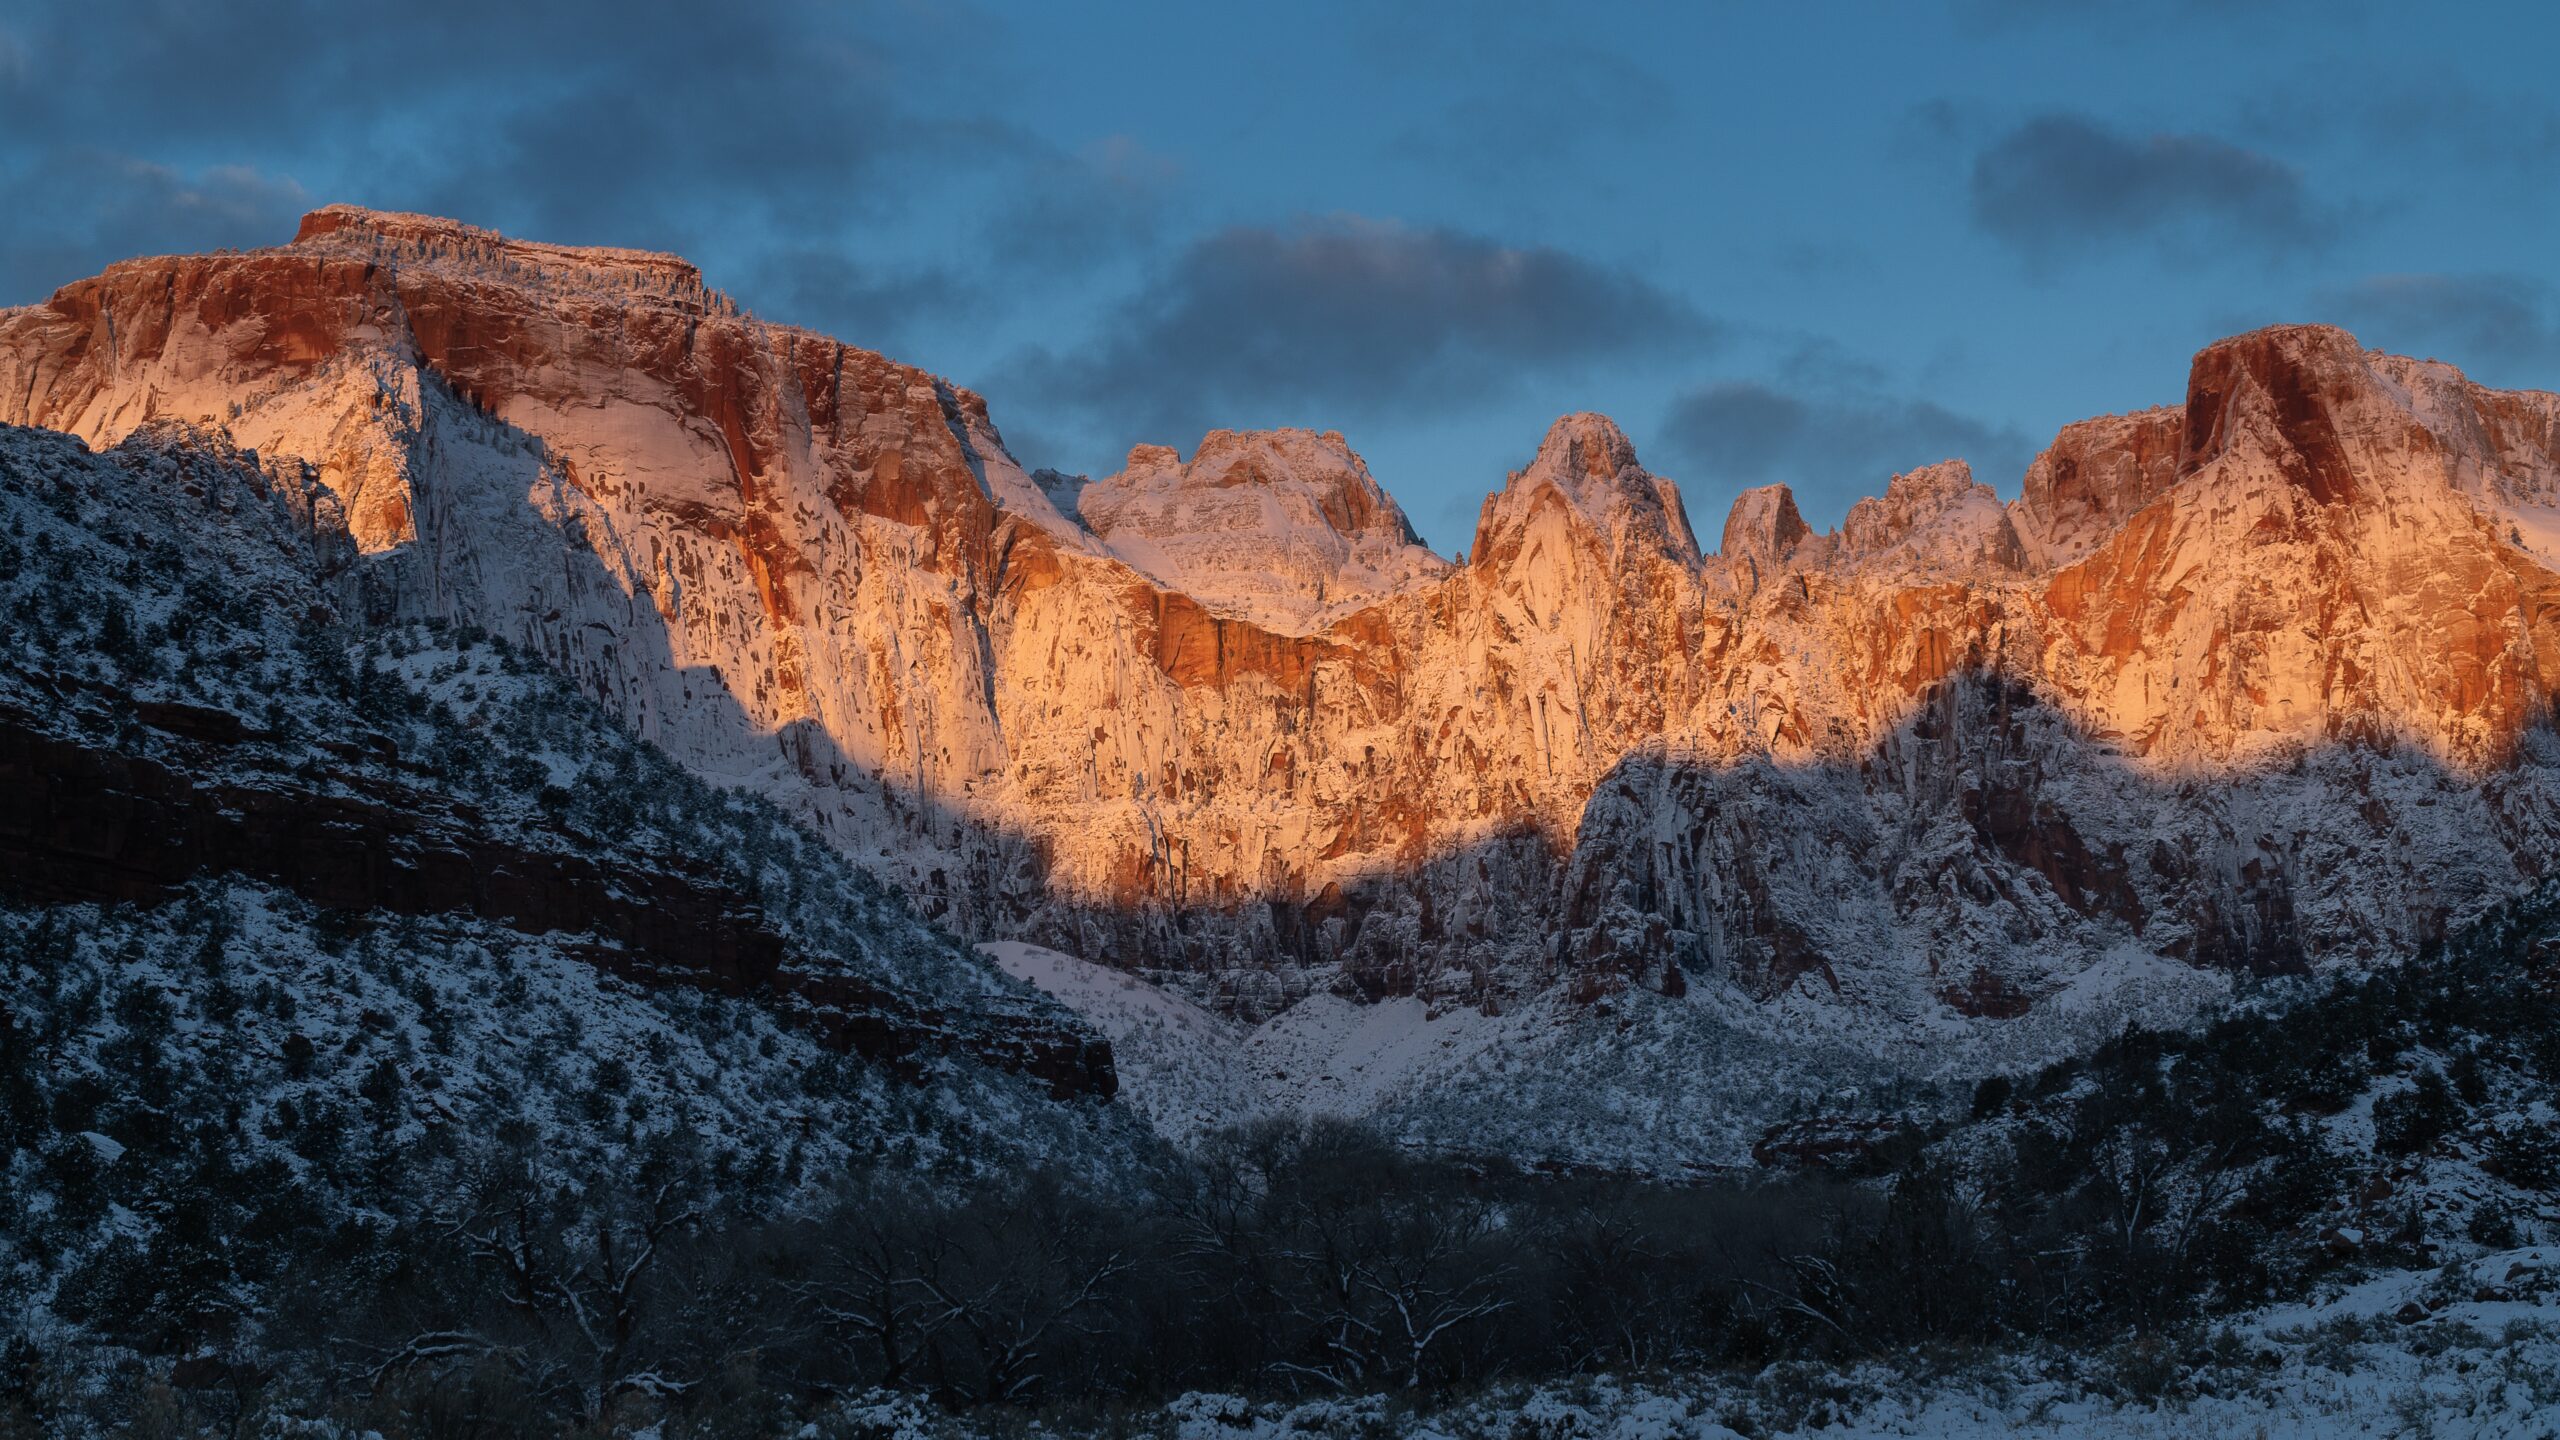 Sunrise on the red mountains in Zion